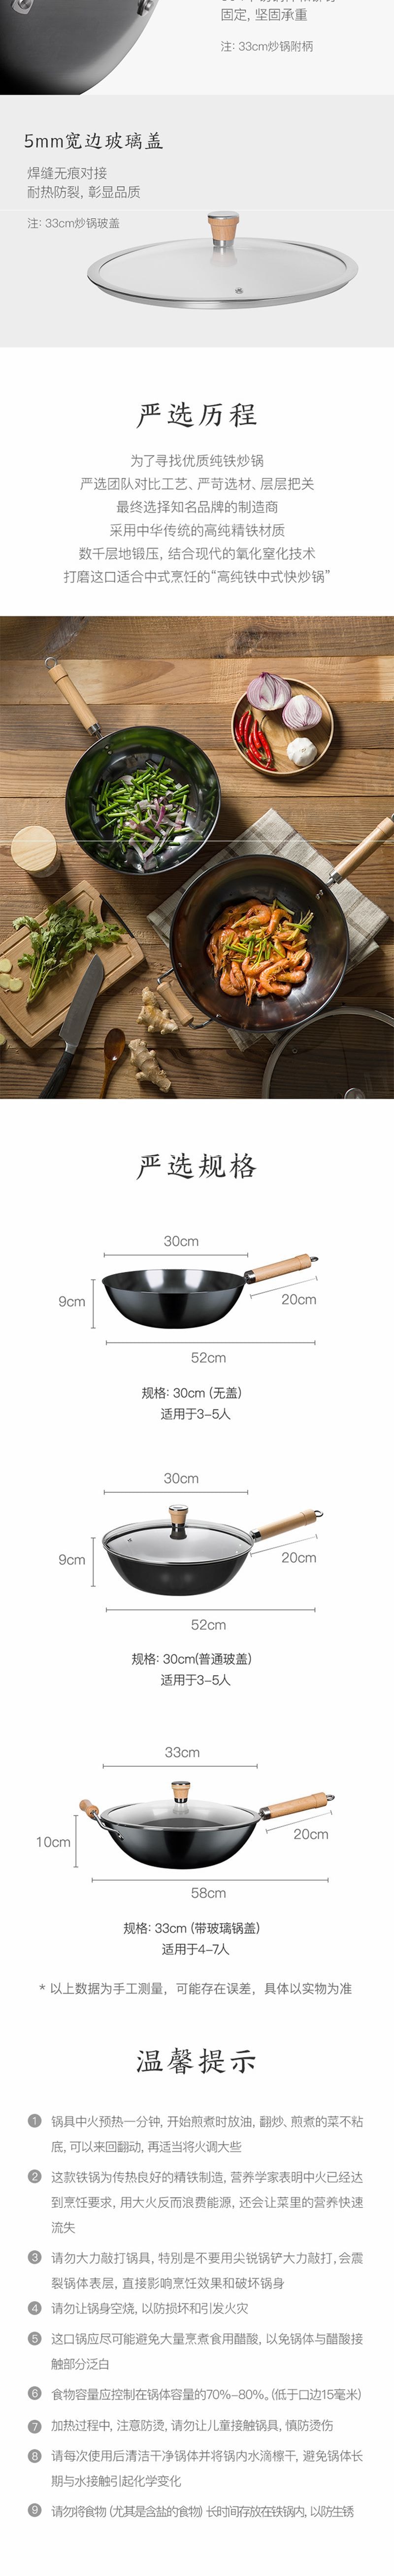 Chinese Carbon Steel Wok - Rust-proof &amp; Anti-Scratch Lid Included [5-7 Days U.S. Shipping]